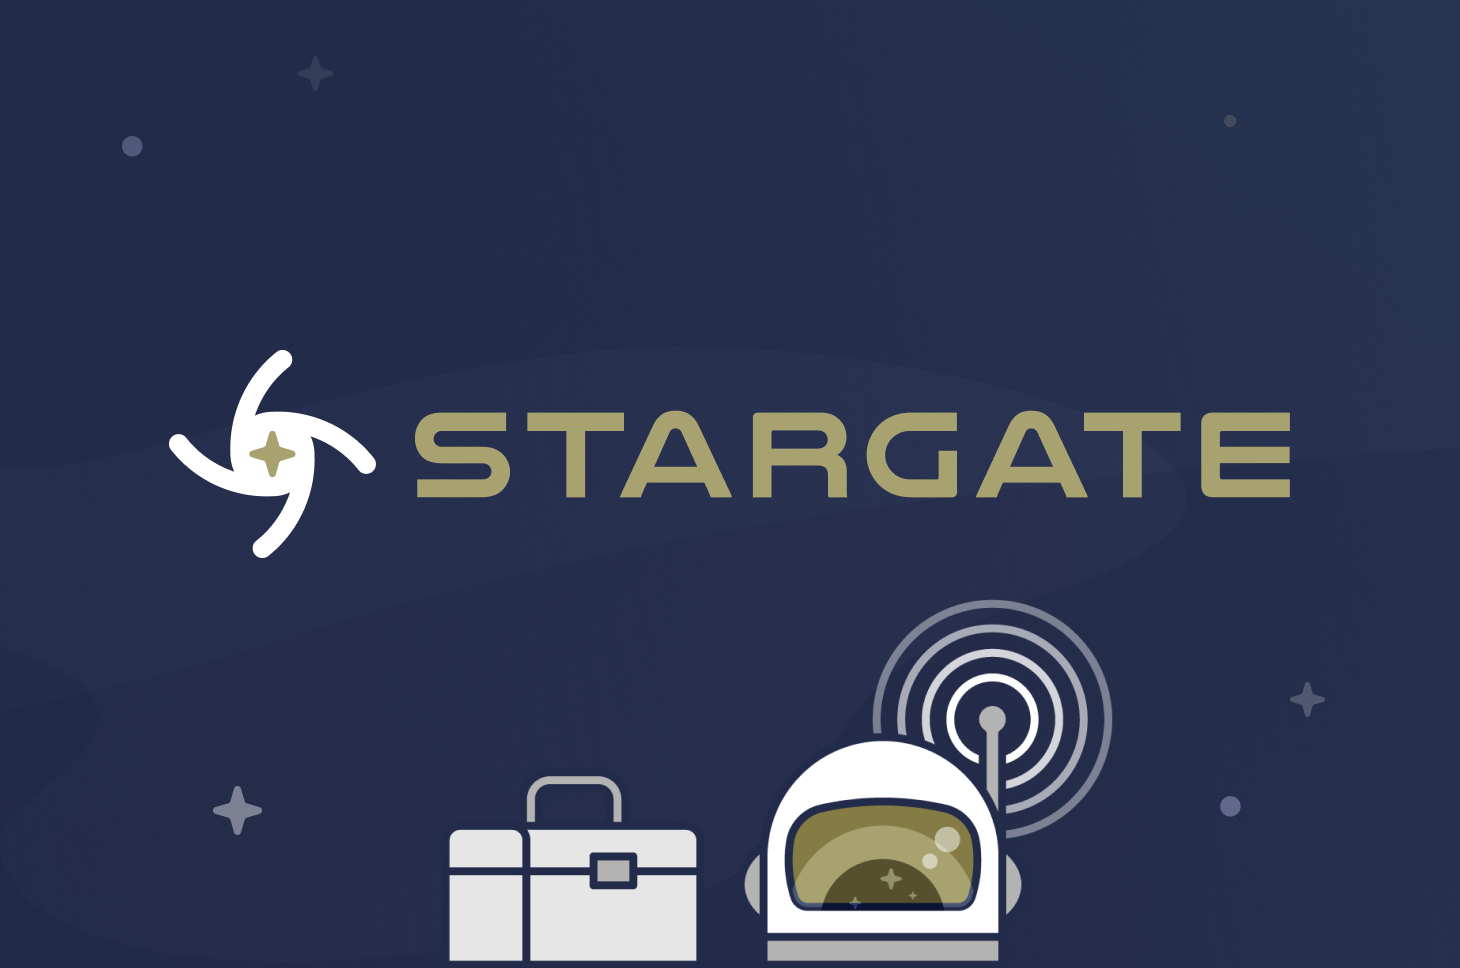 They told me it is inactive : r/Stargate